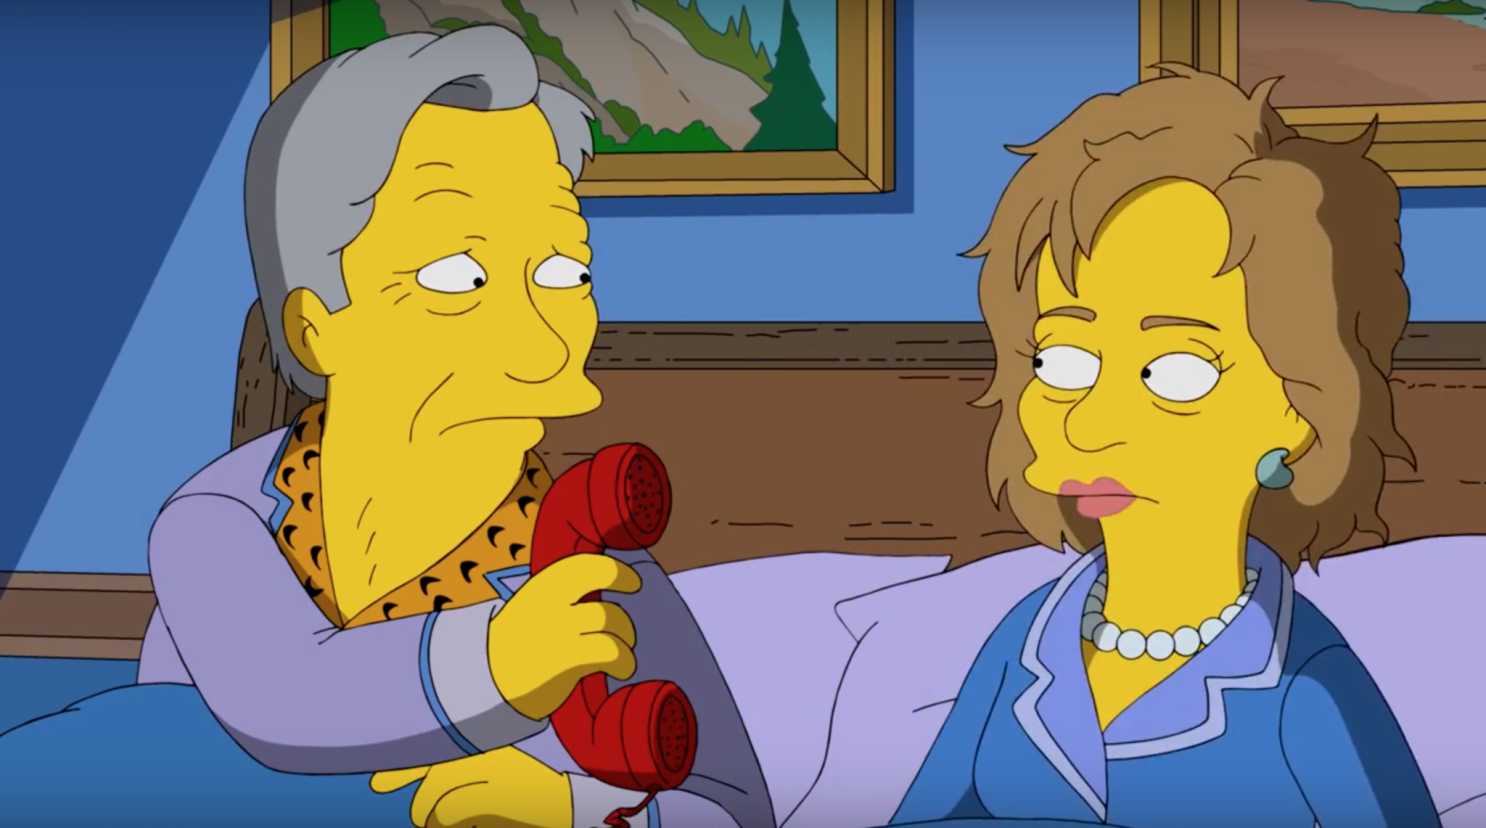 The Simpsons' takes aim at Donald Trump in new video - Los Angeles Times